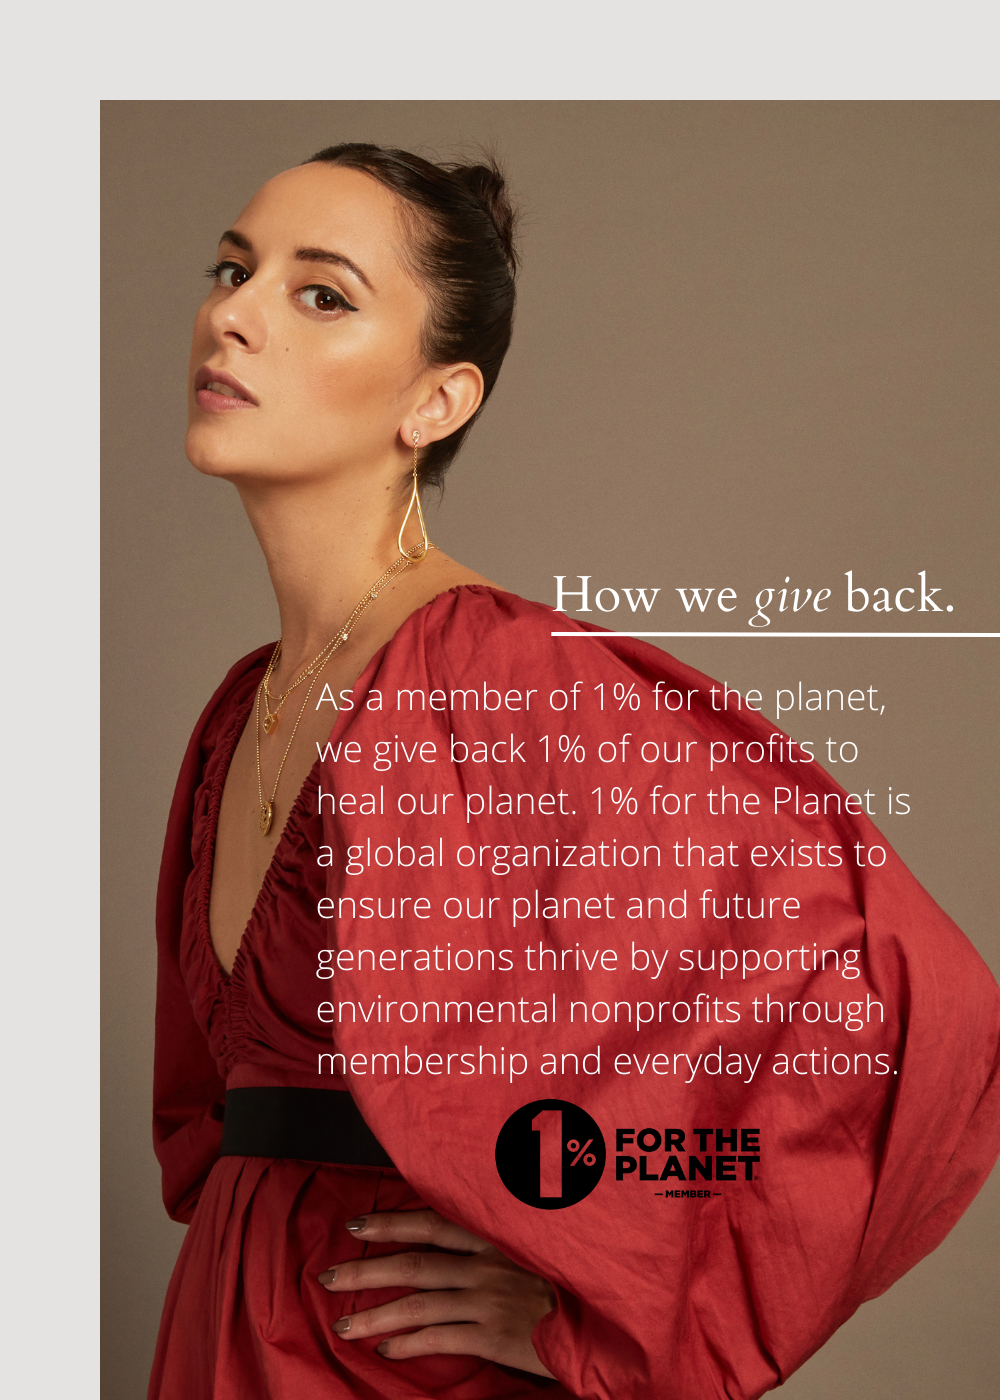 How cadre style gives back to the planet as a member 1% for the planet